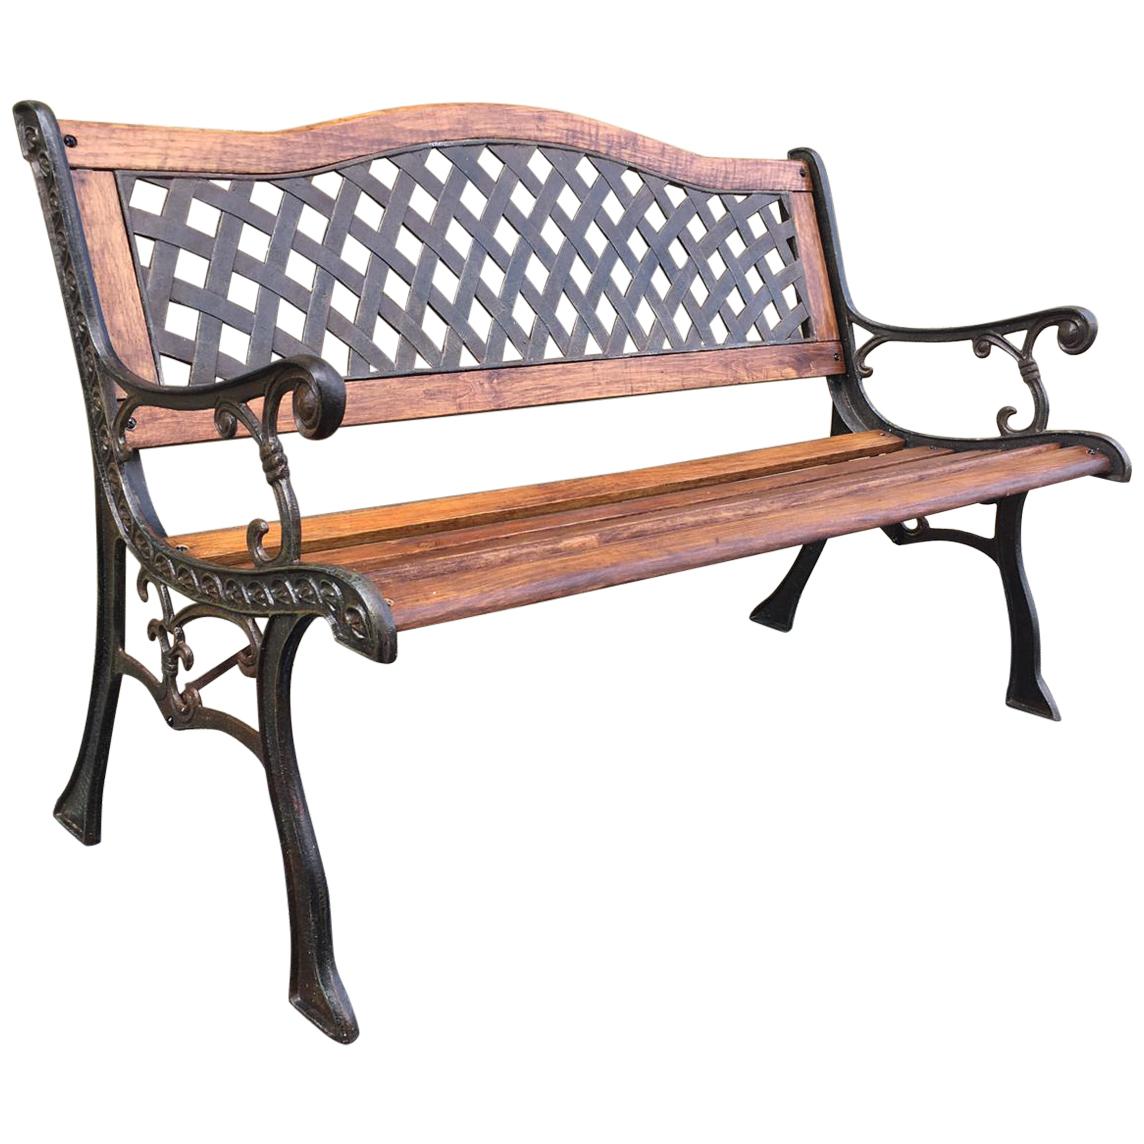 20th Century Oak and Cast Iron Garden or Park Bench